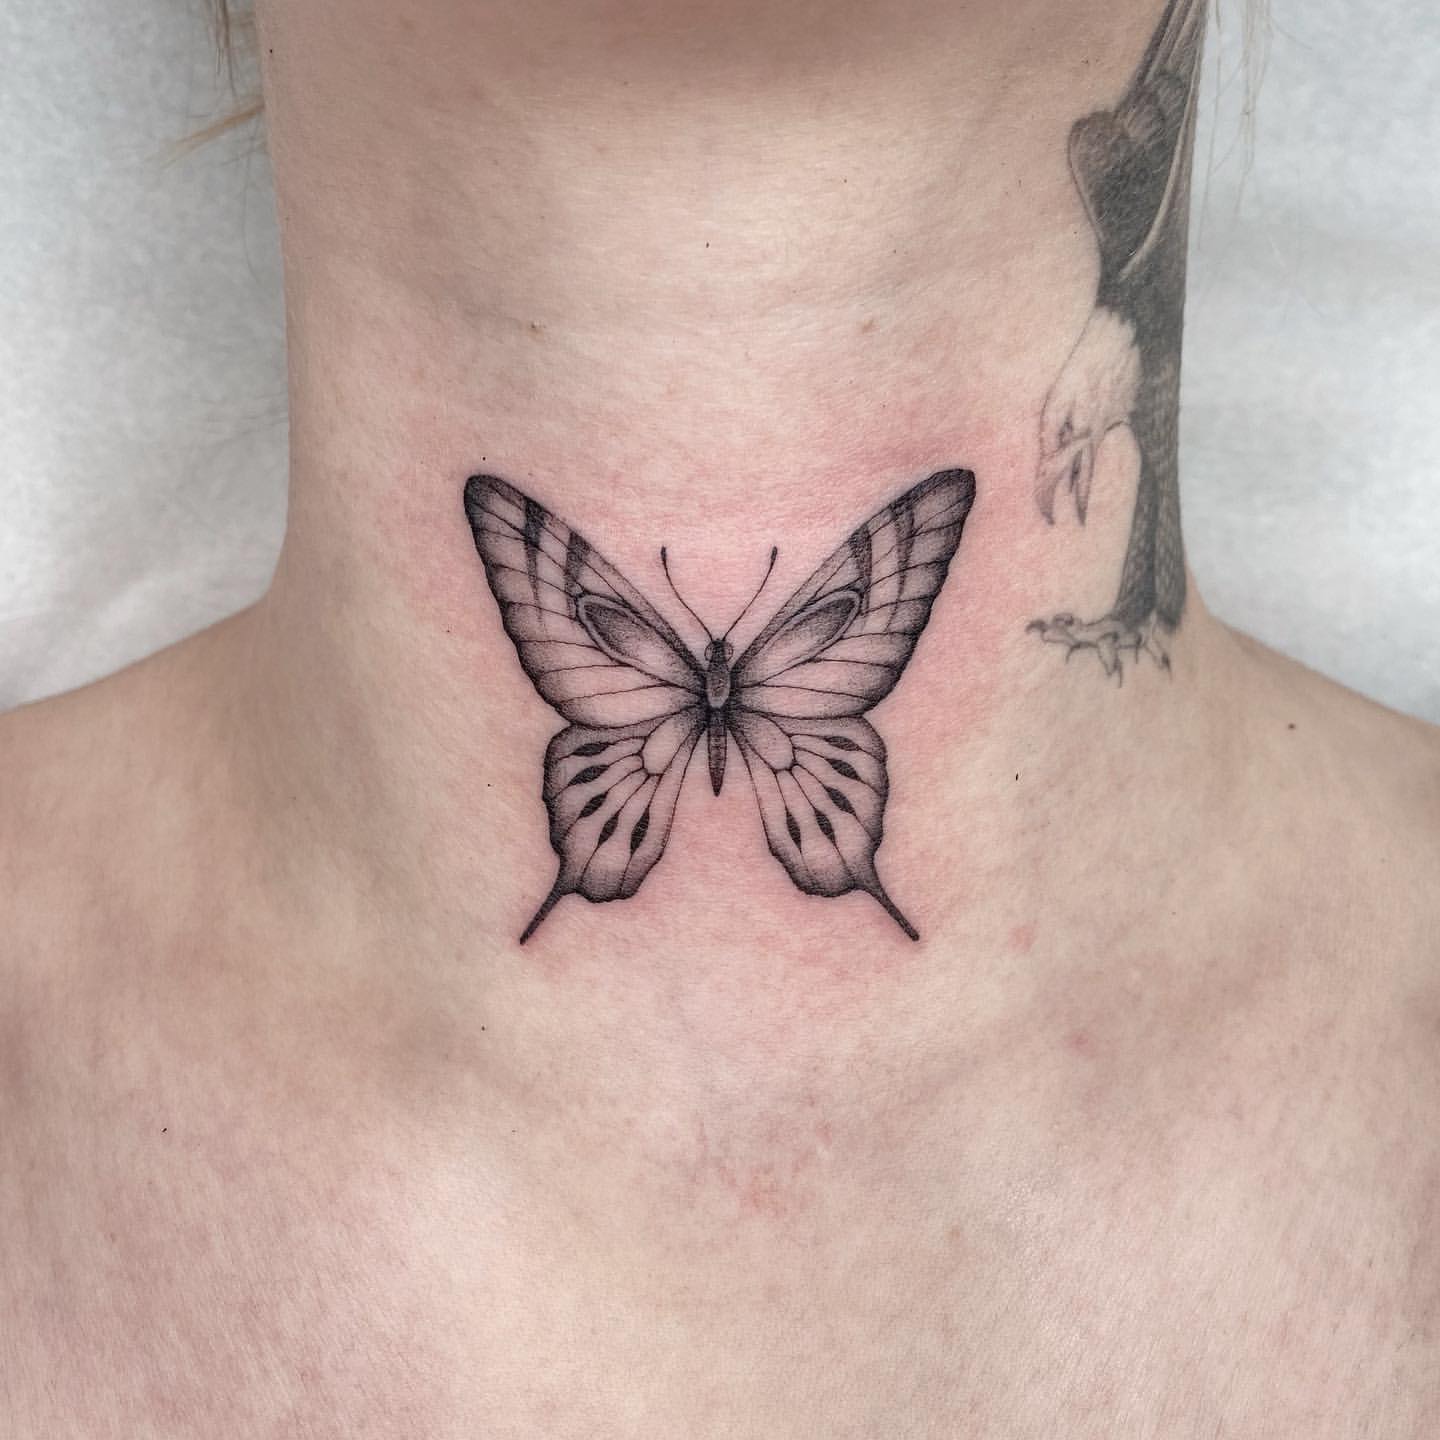 Butterfly tattoo on the back of the neck